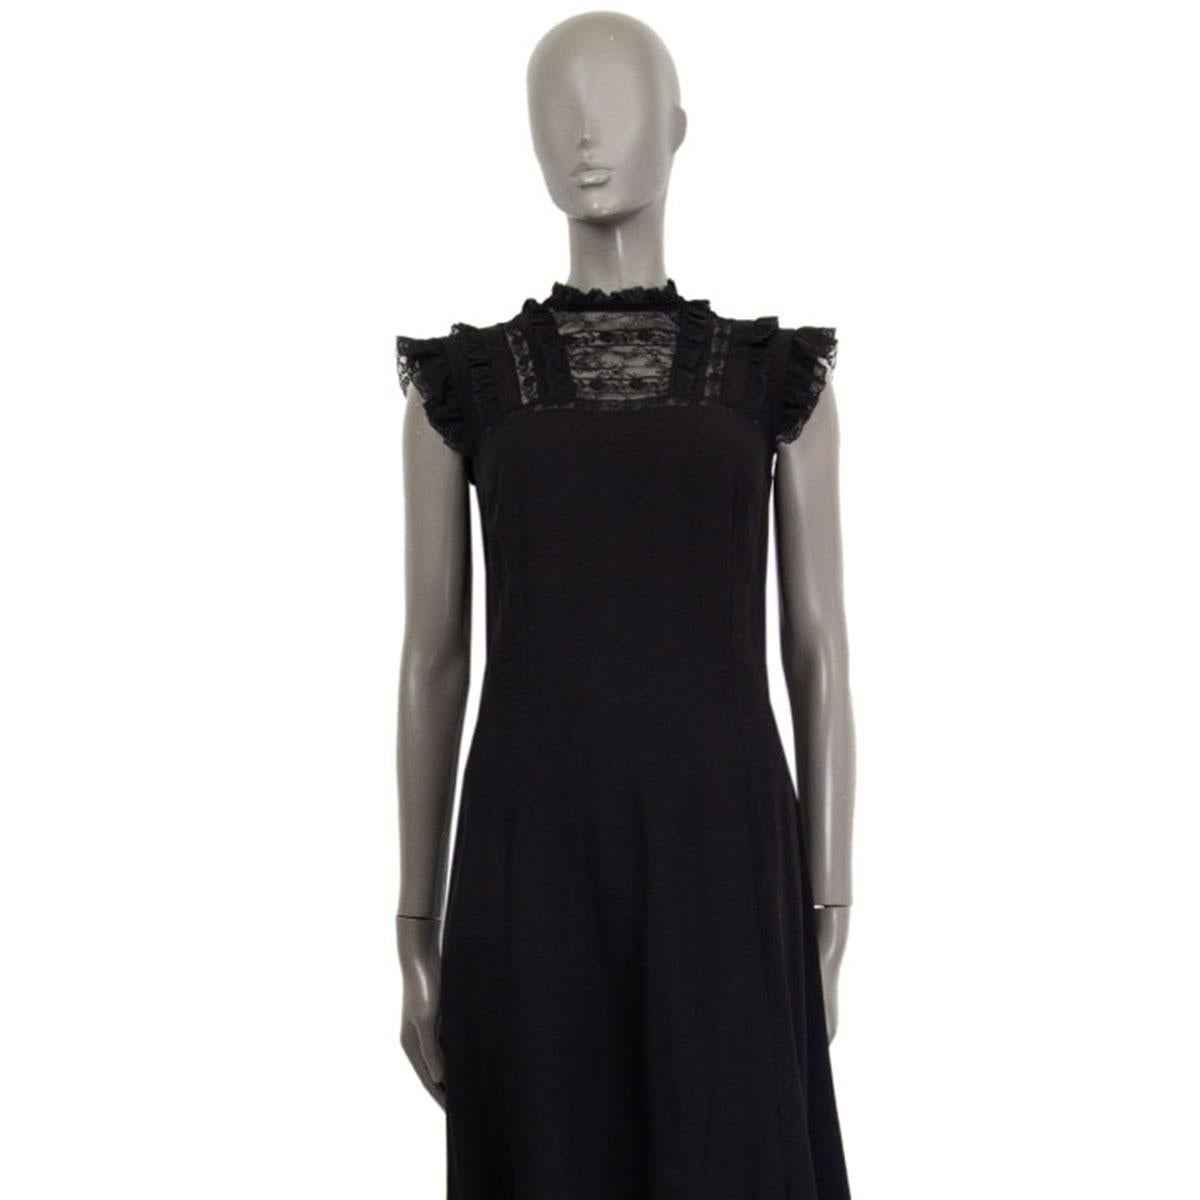 authentic Prada cap sleeve flared dress in black viscose blend (assuming as the content tag is missing) with lace-ruffle and detailed lace-trim at the top and along the hem. Unlined. Closes with a concealed zipper at the back. Has been worn and is